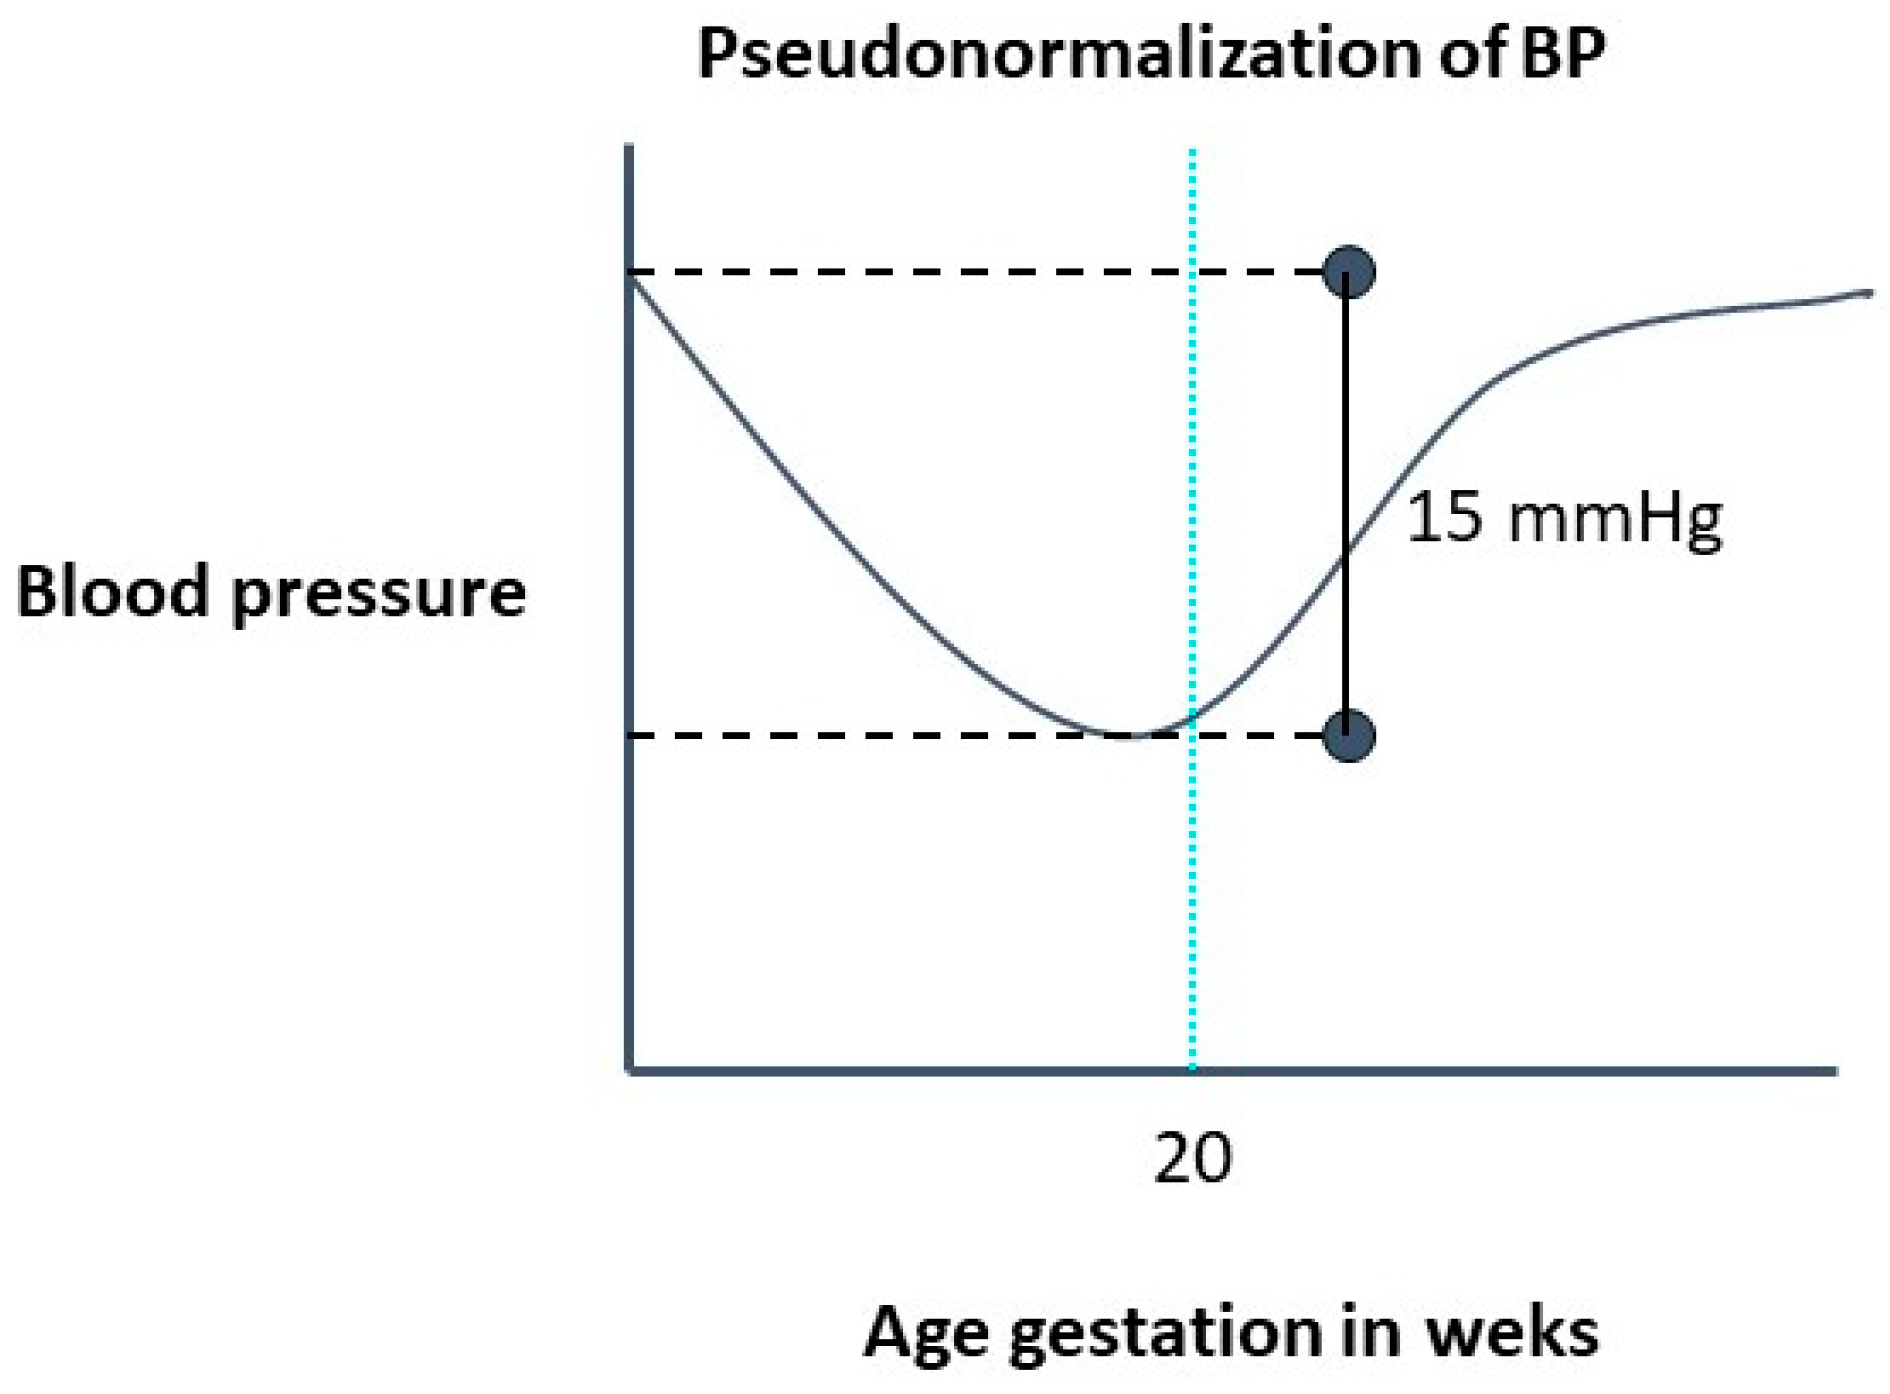 Hypertension in Pregnancy: Current Perspective